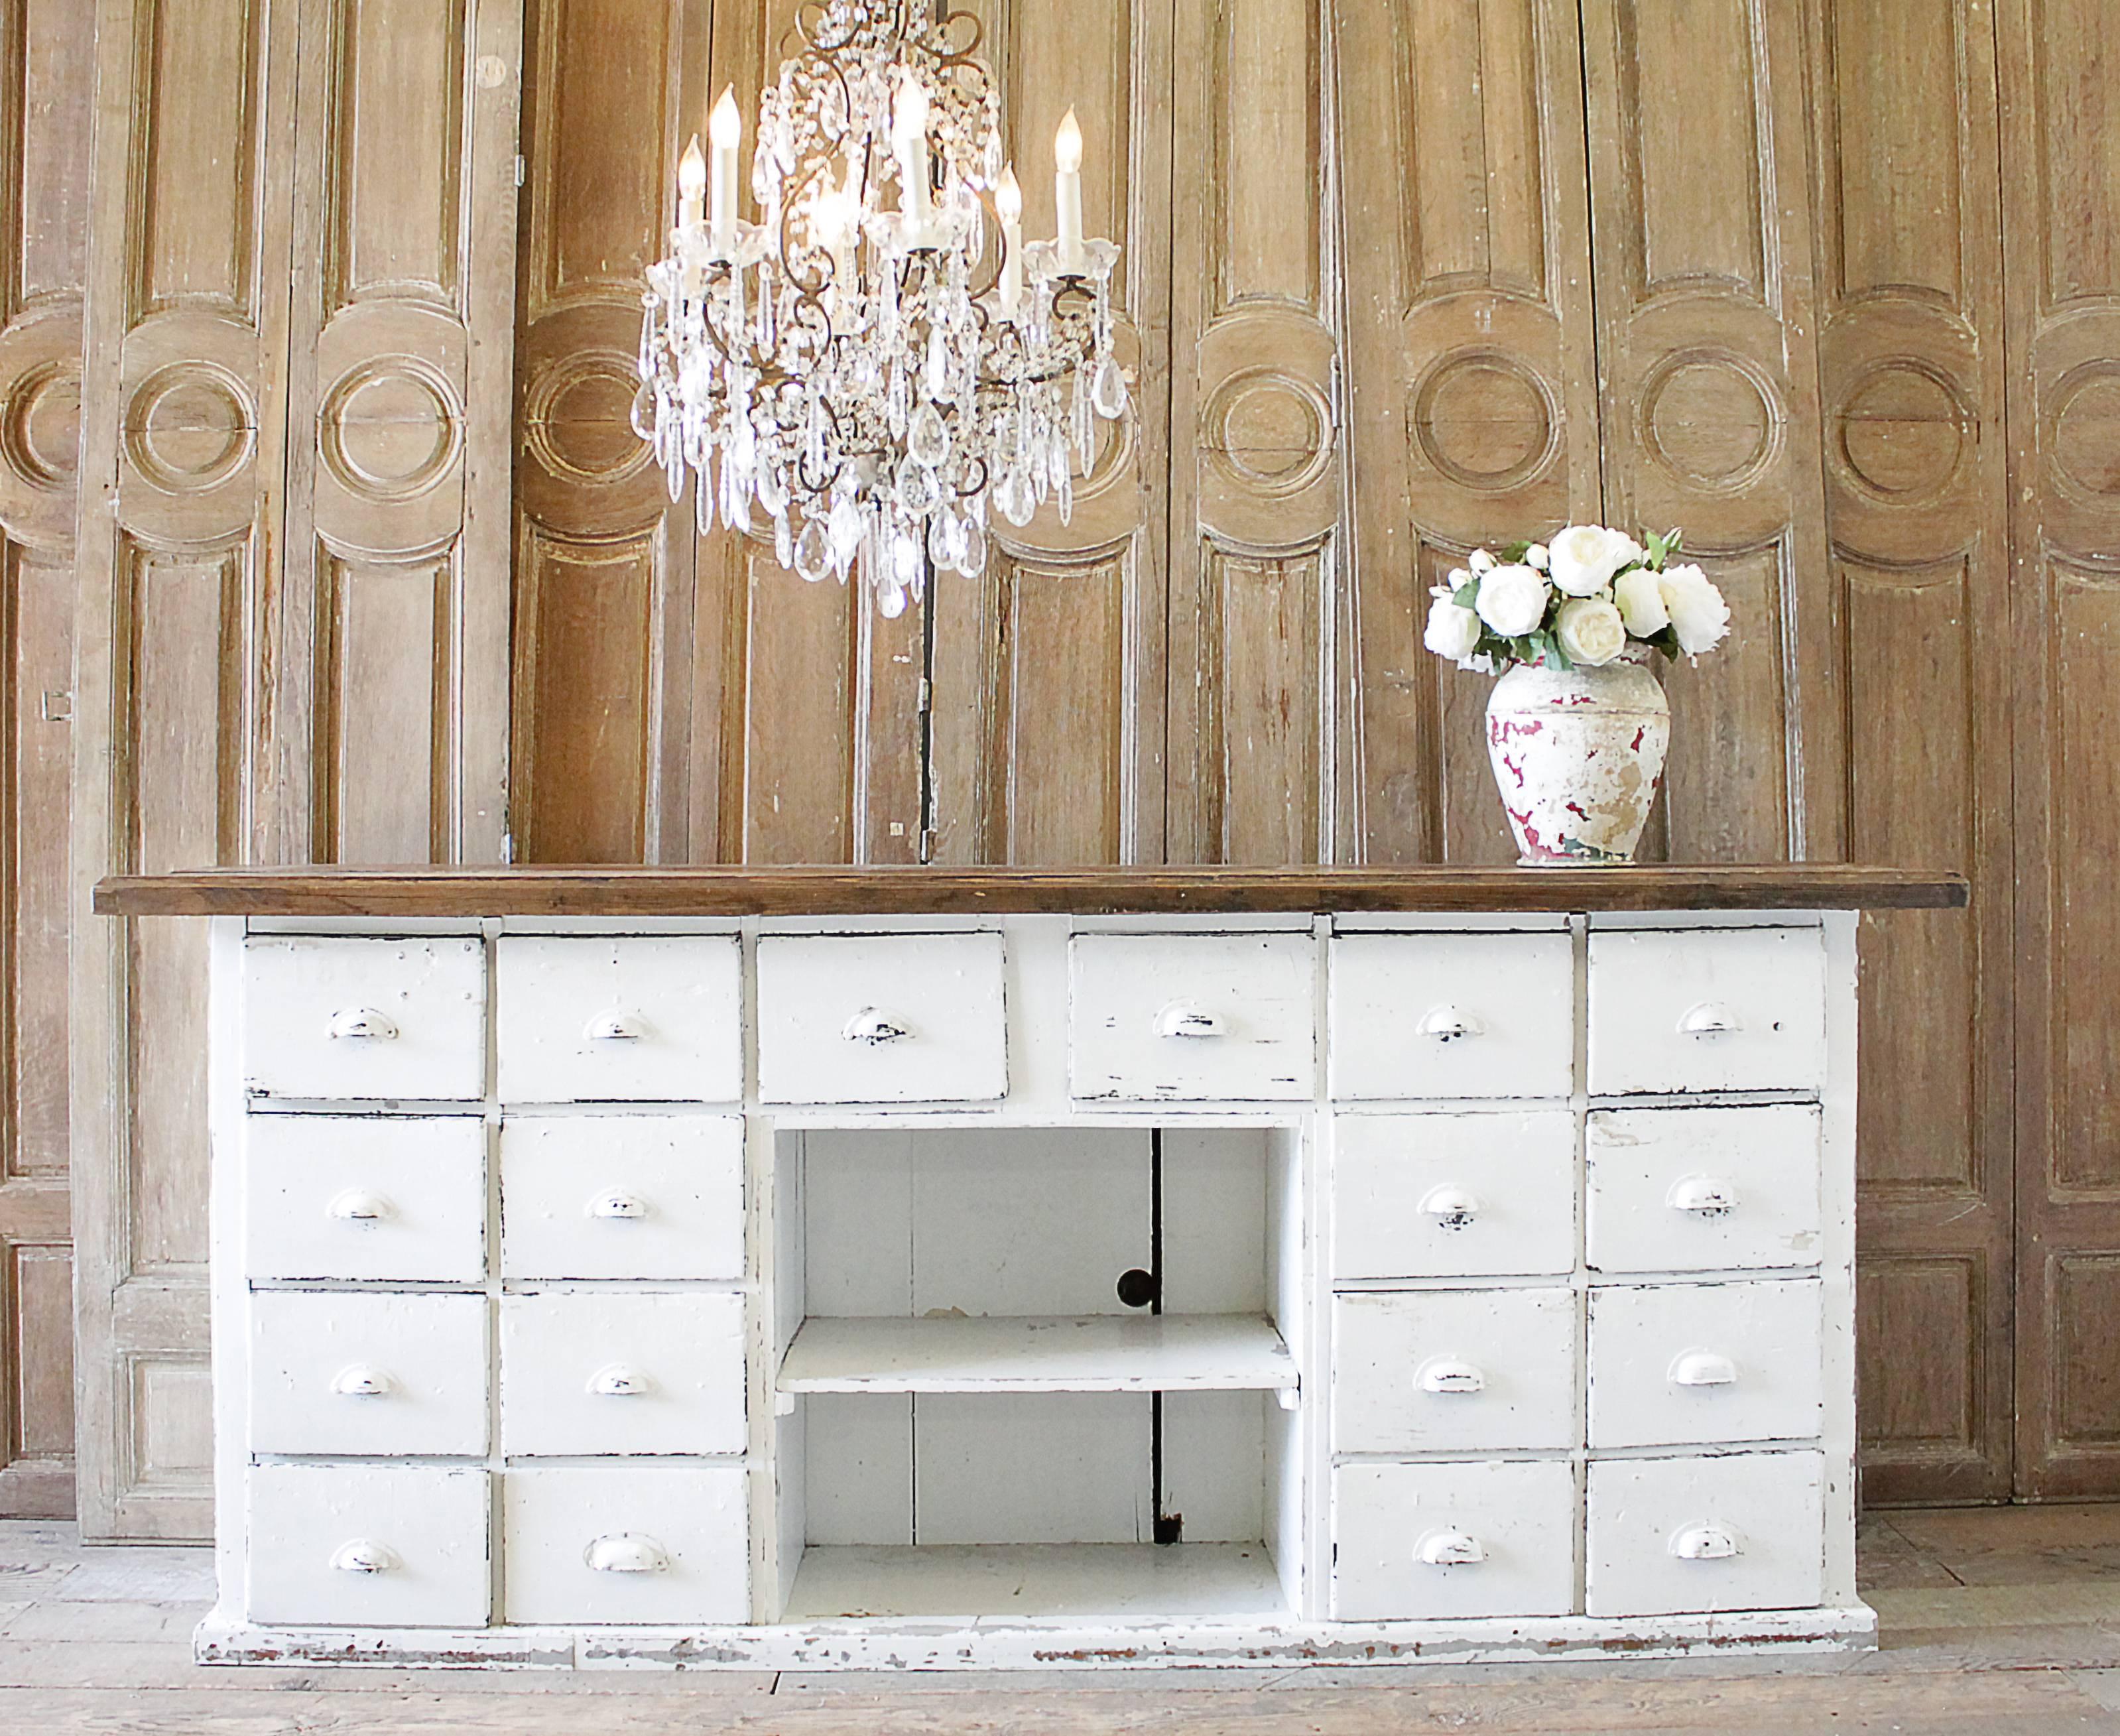 Farmhouse style cabinet, large with multiple working drawers, and thick wood plank top. This cabinet has the original bin pull handles, and each drawer has a number you can see through the white paint. The paint is pure white, with chippy areas